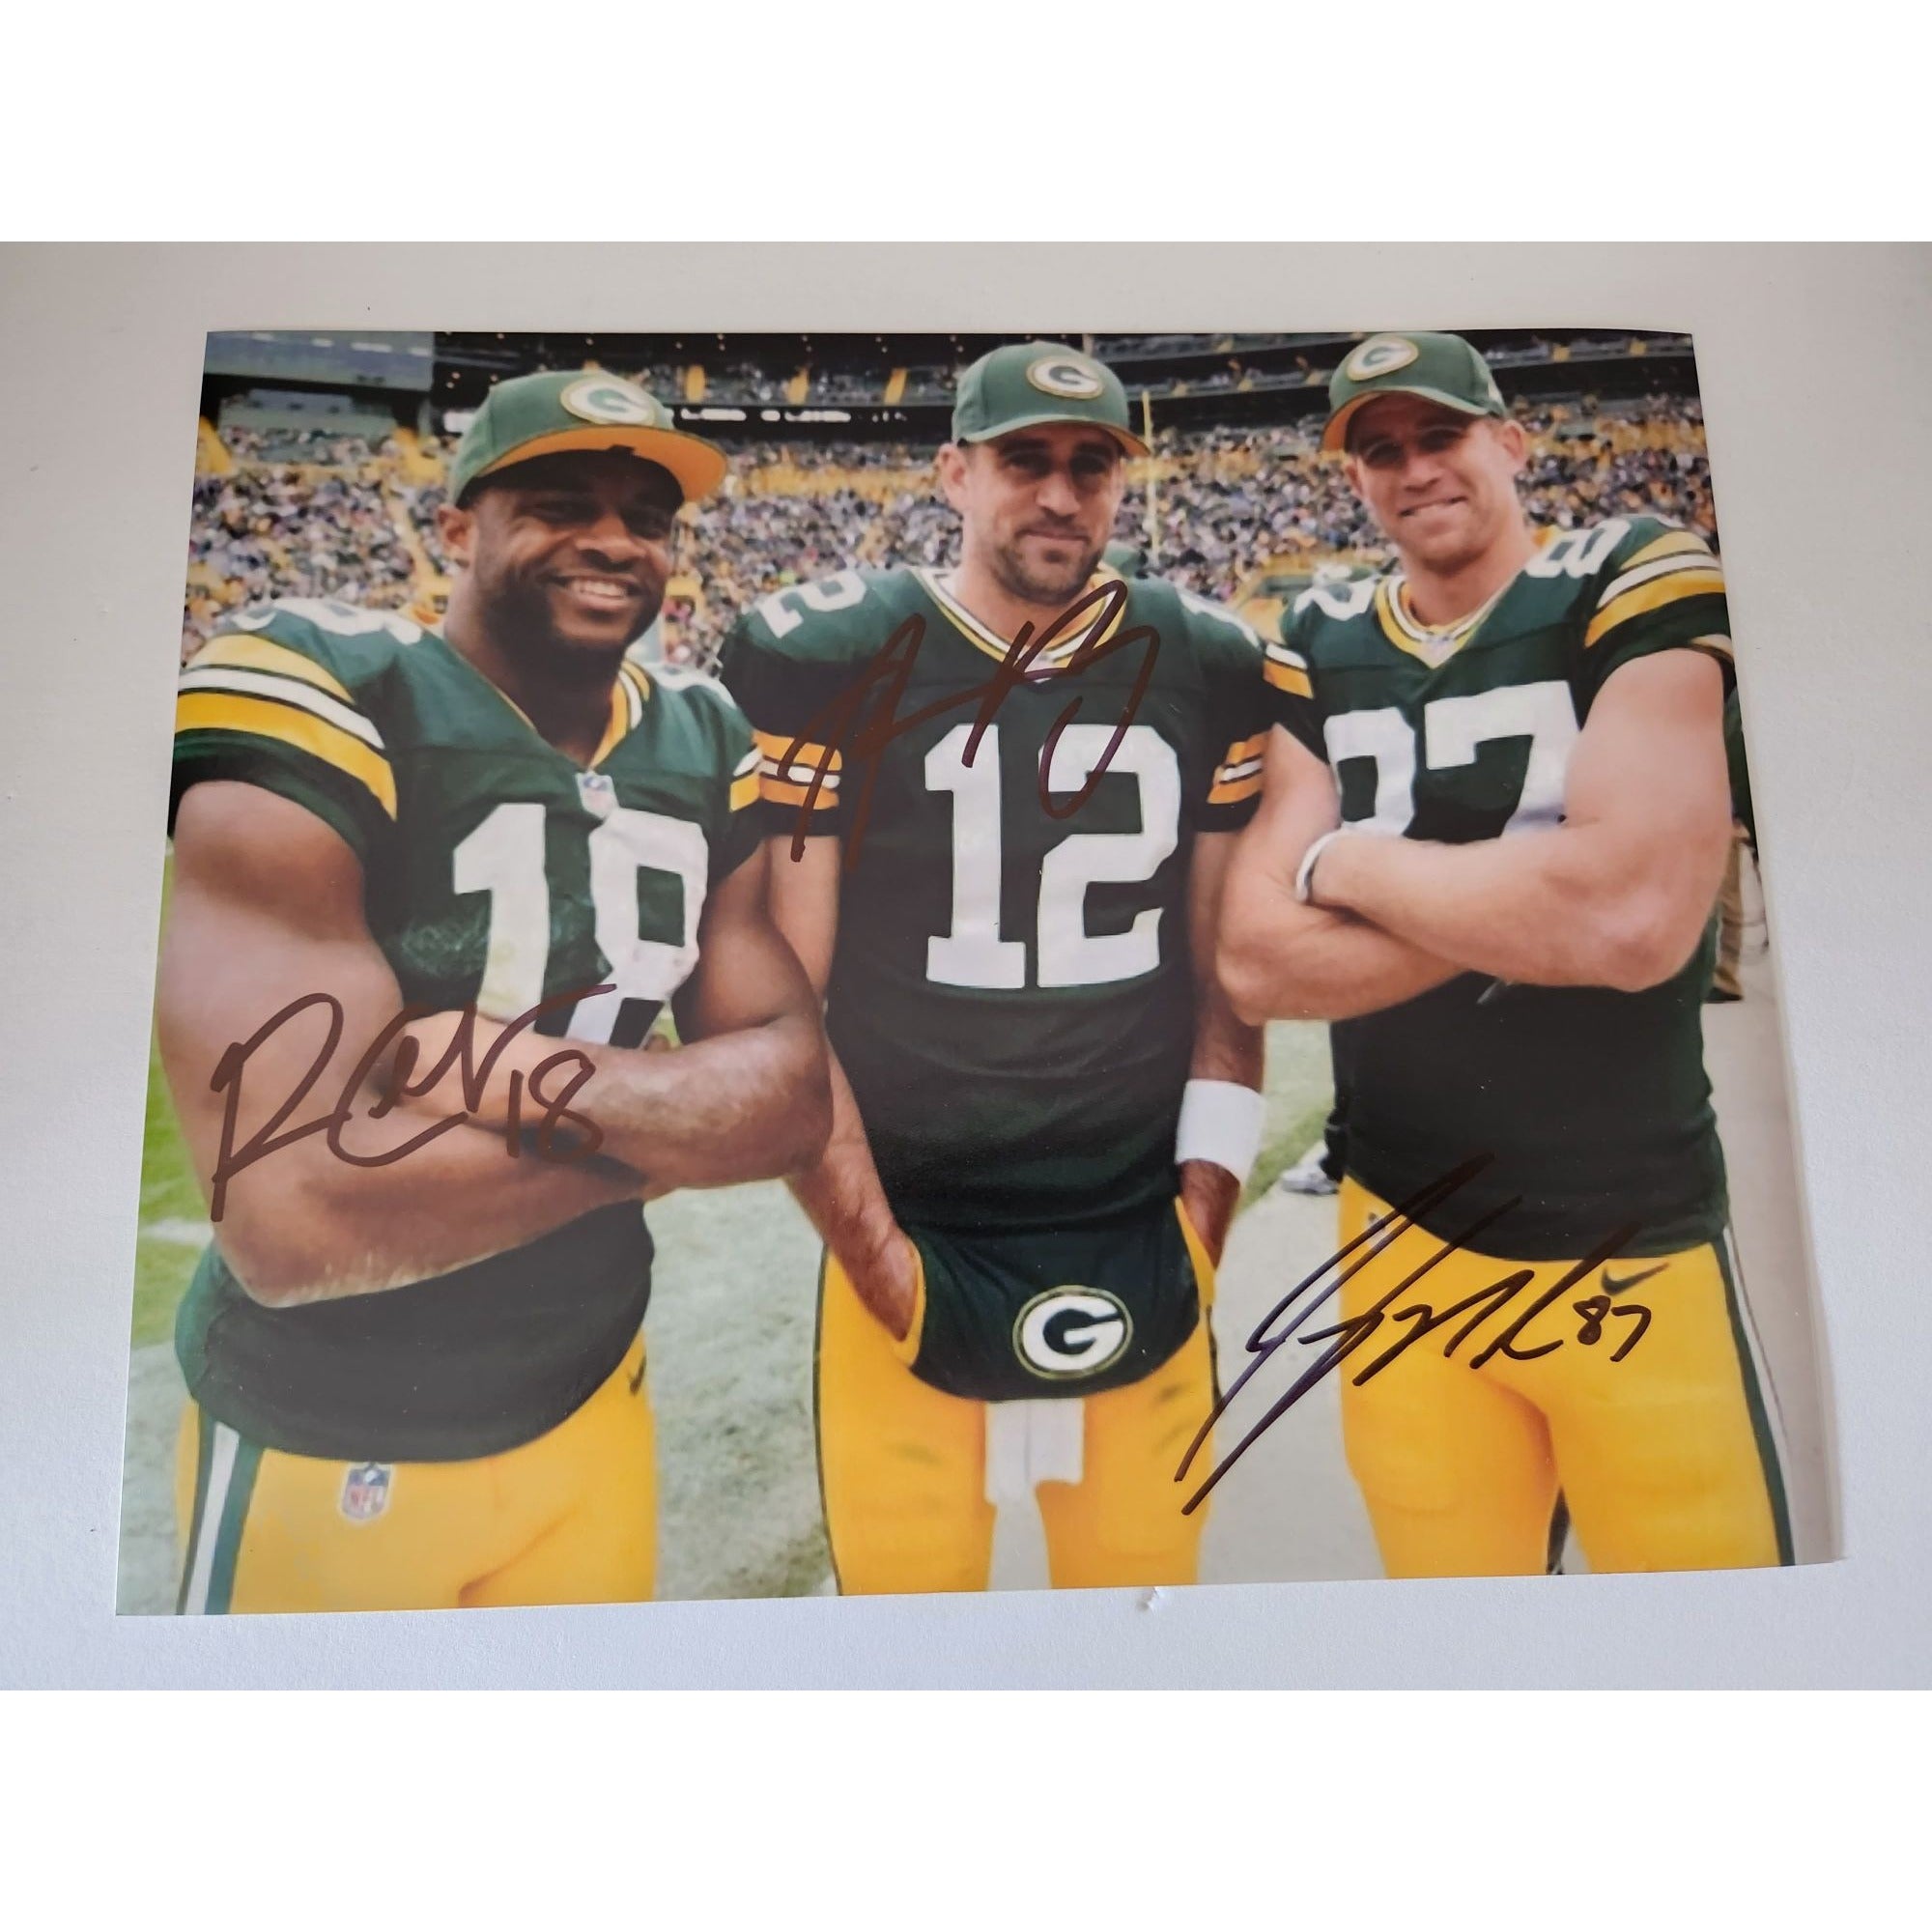 Aaron Rodgers Randall Cobb Jordy Nelson Green Bay Packers 8x10 photo signed